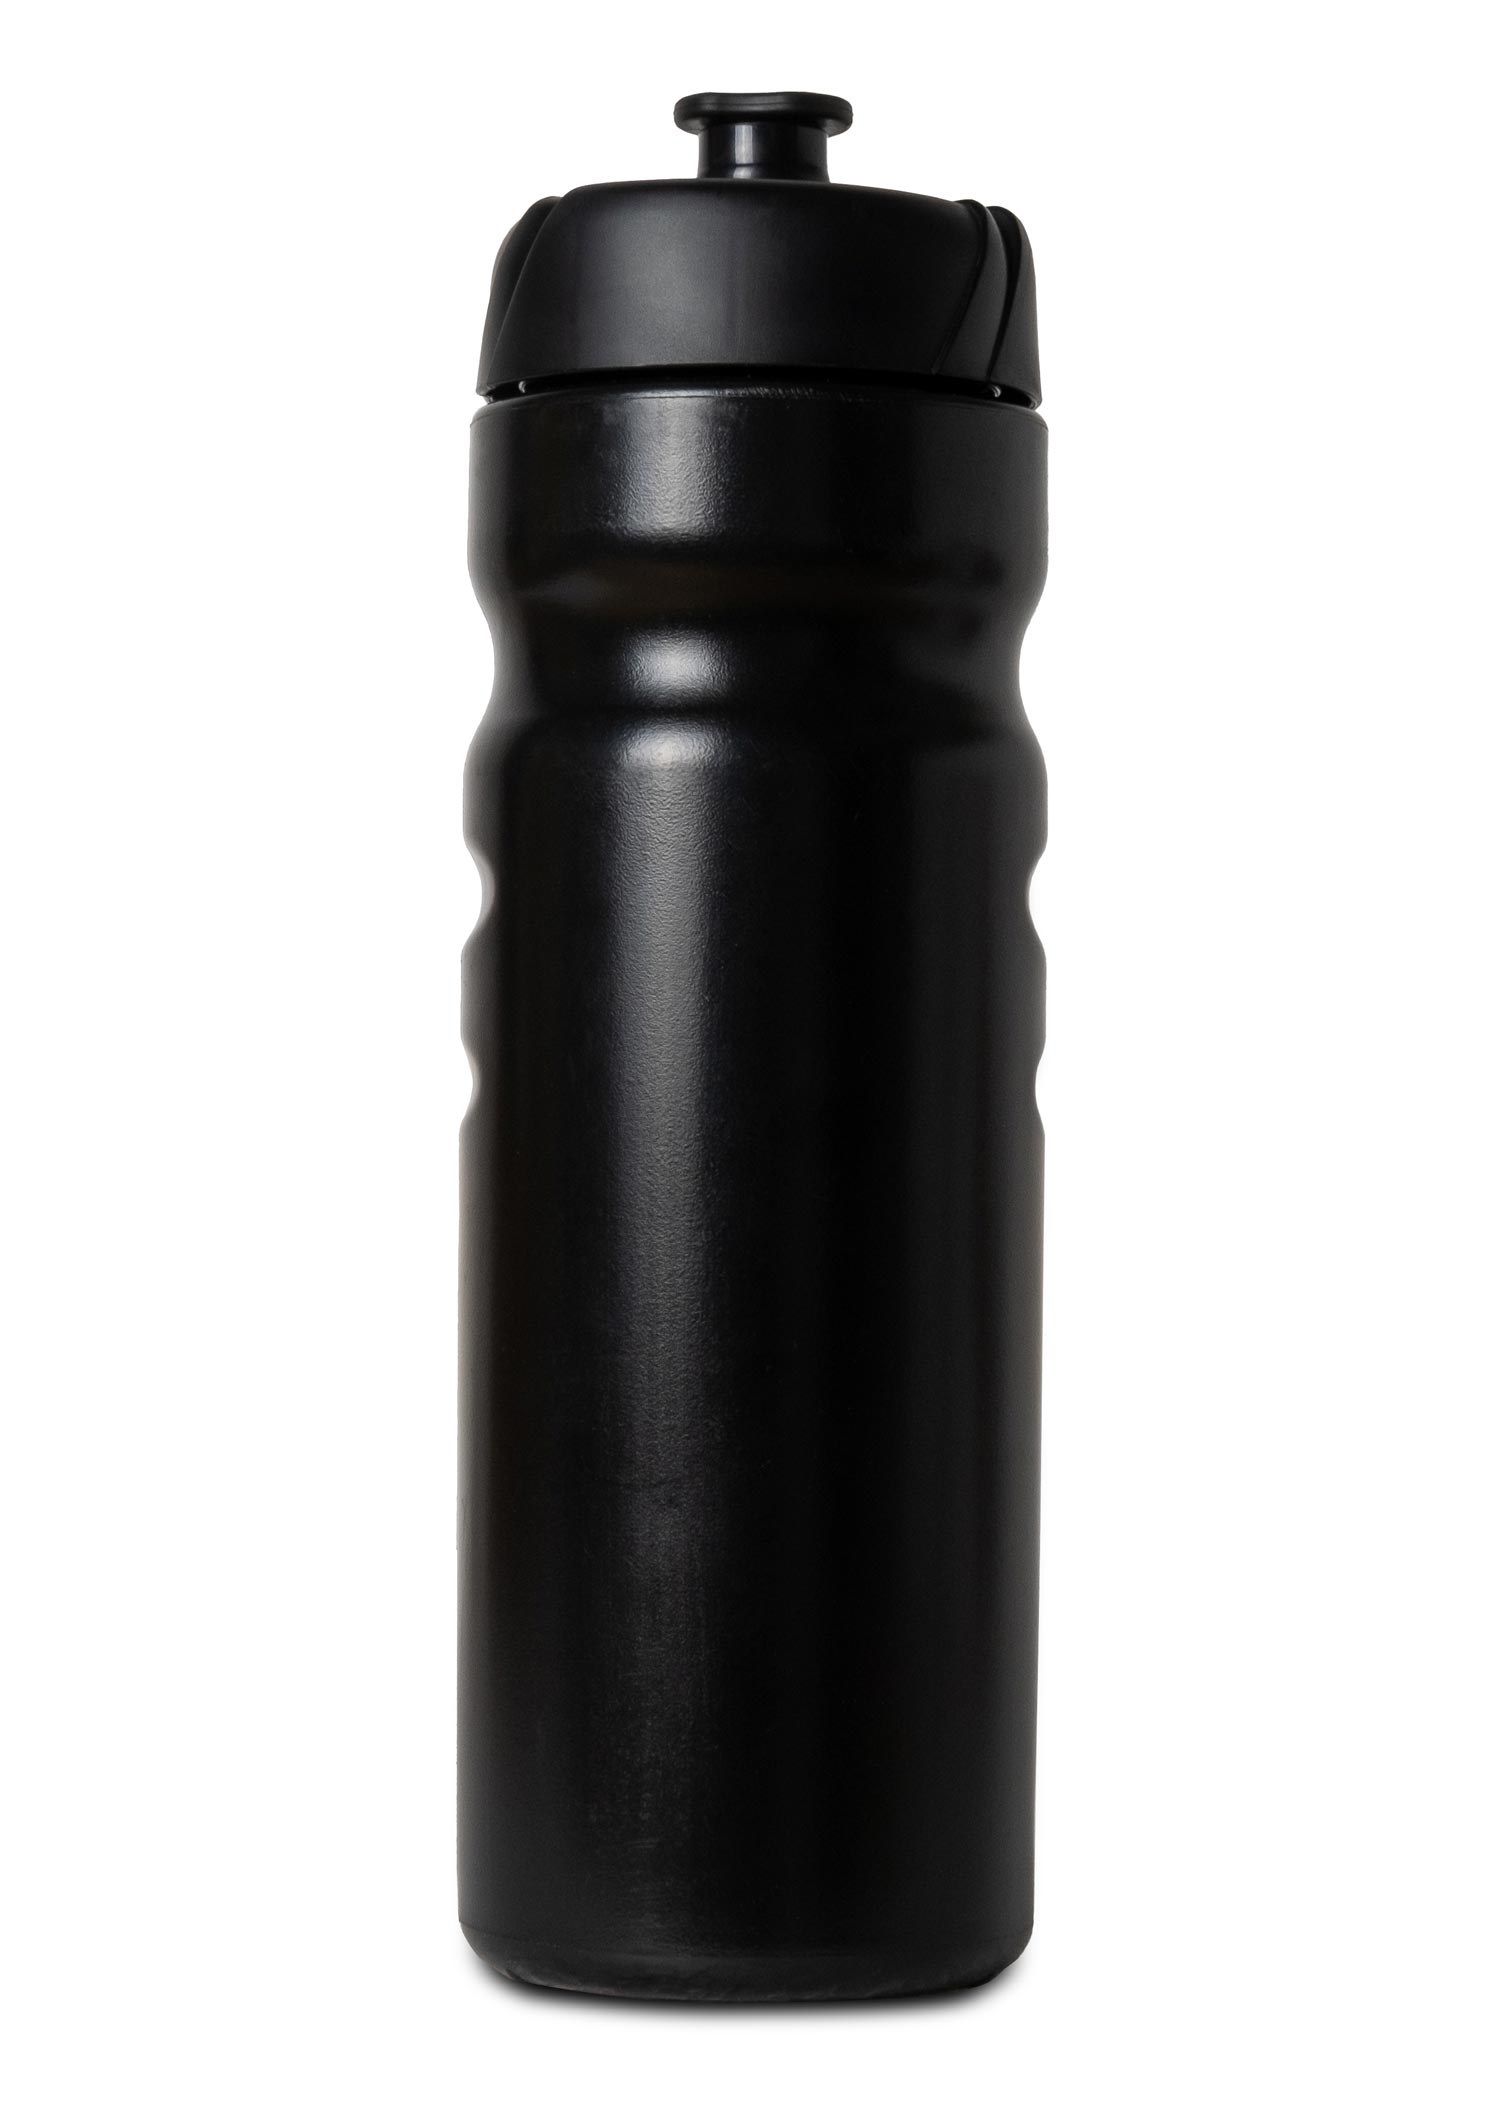 Bicycle Drinking Bottle "Skull and Crossbones"